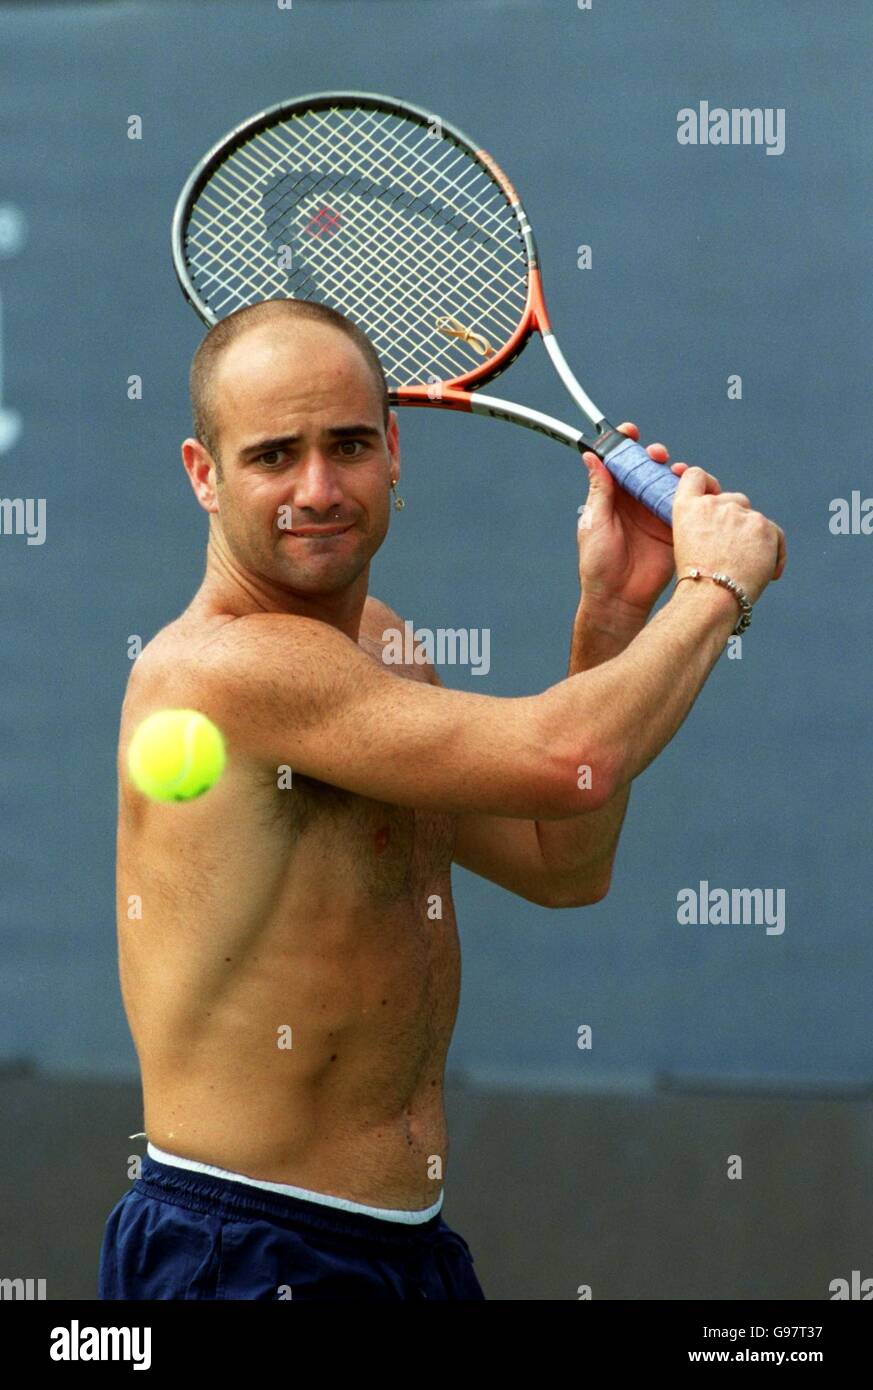 https://c8.alamy.com/comp/G97T37/andre-agassi-looks-in-fine-form-during-a-practice-session-at-flushing-G97T37.jpg